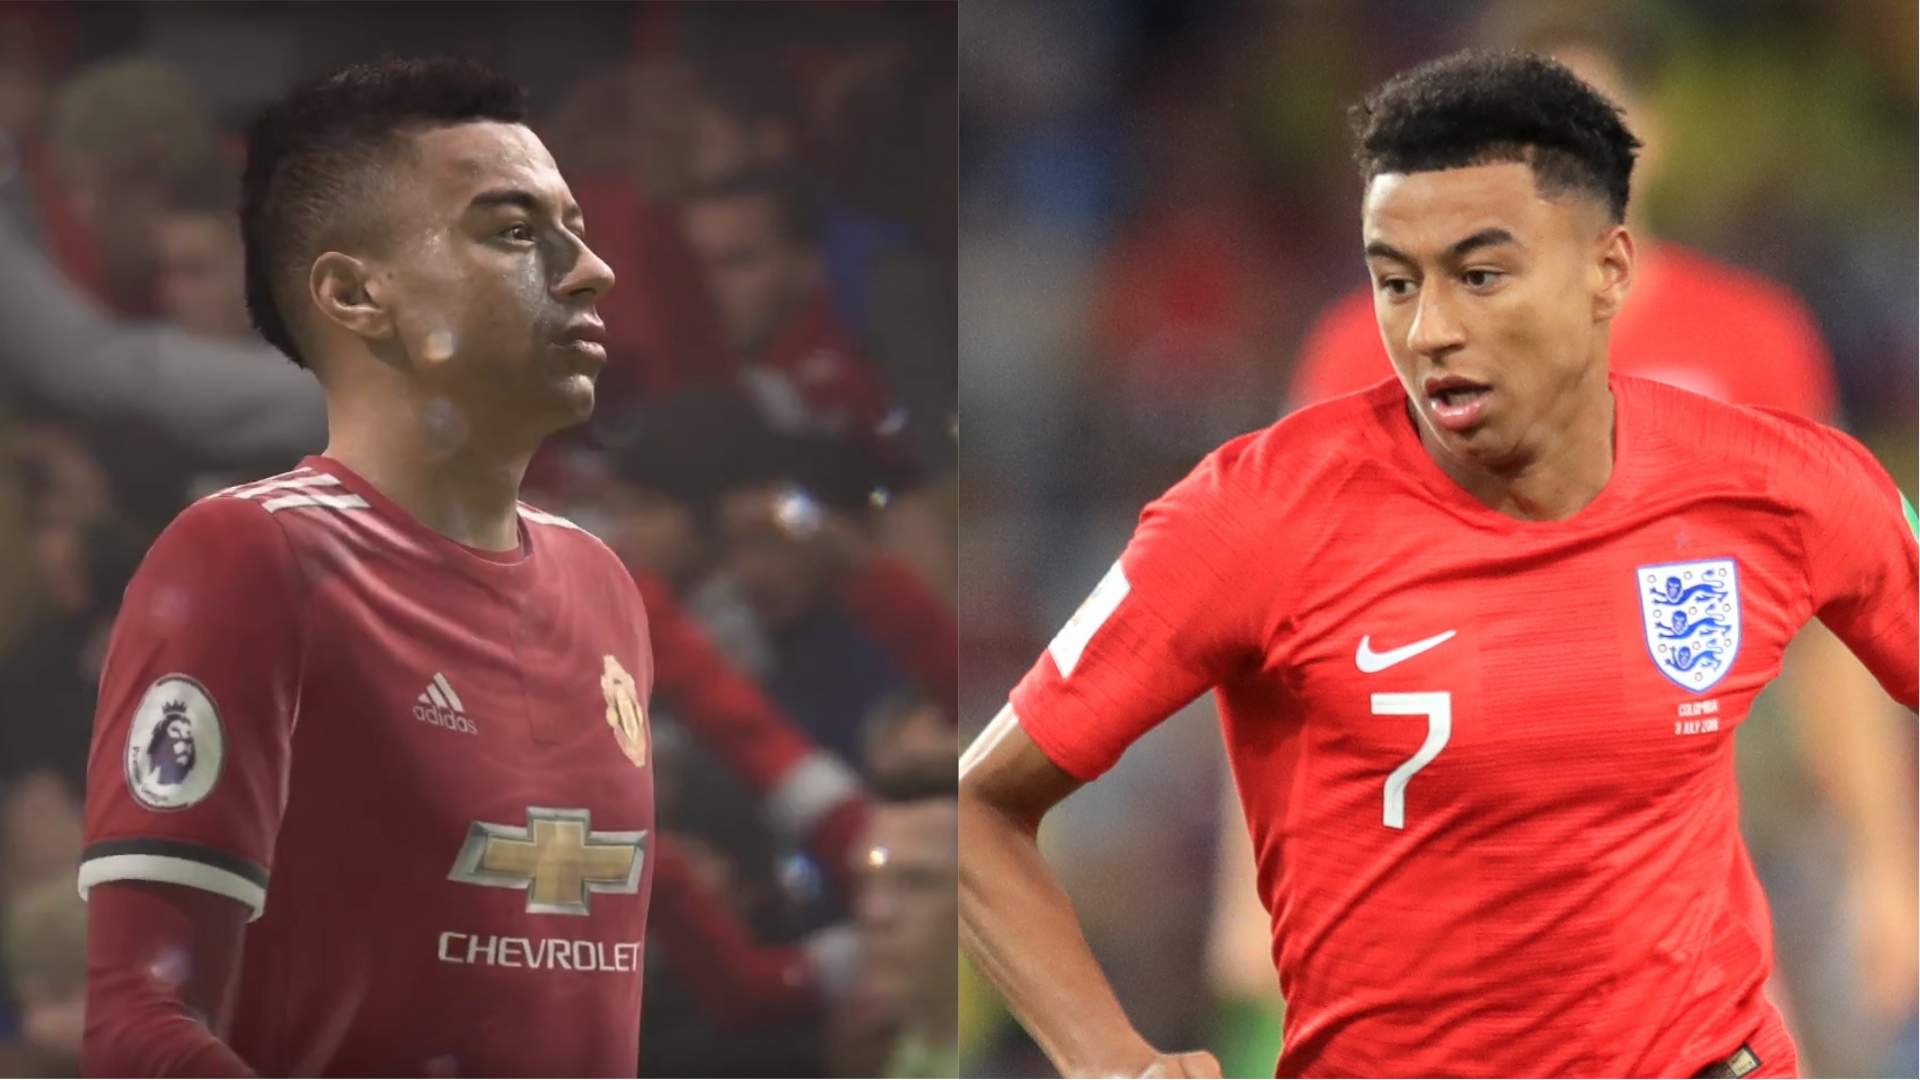 Manchester United midfielder Jesse Lingard on Fifa 18 and in real life